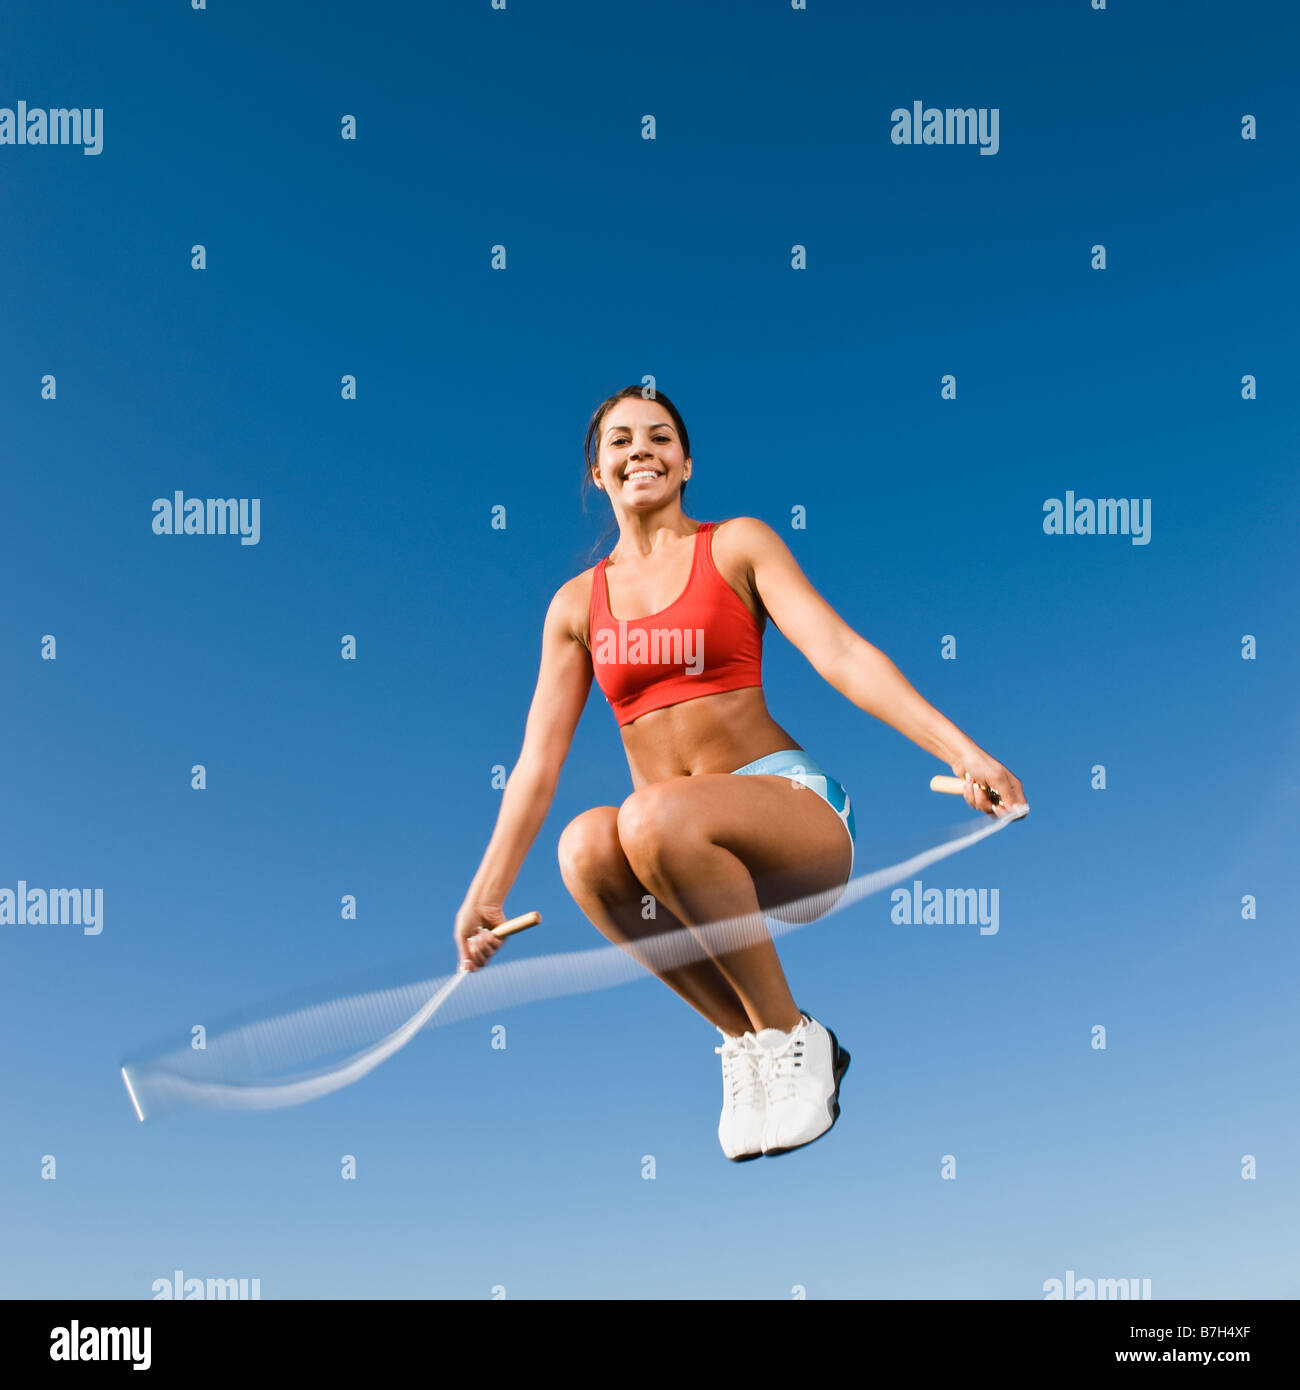 Native American woman jumping rope in mid-air Stock Photo